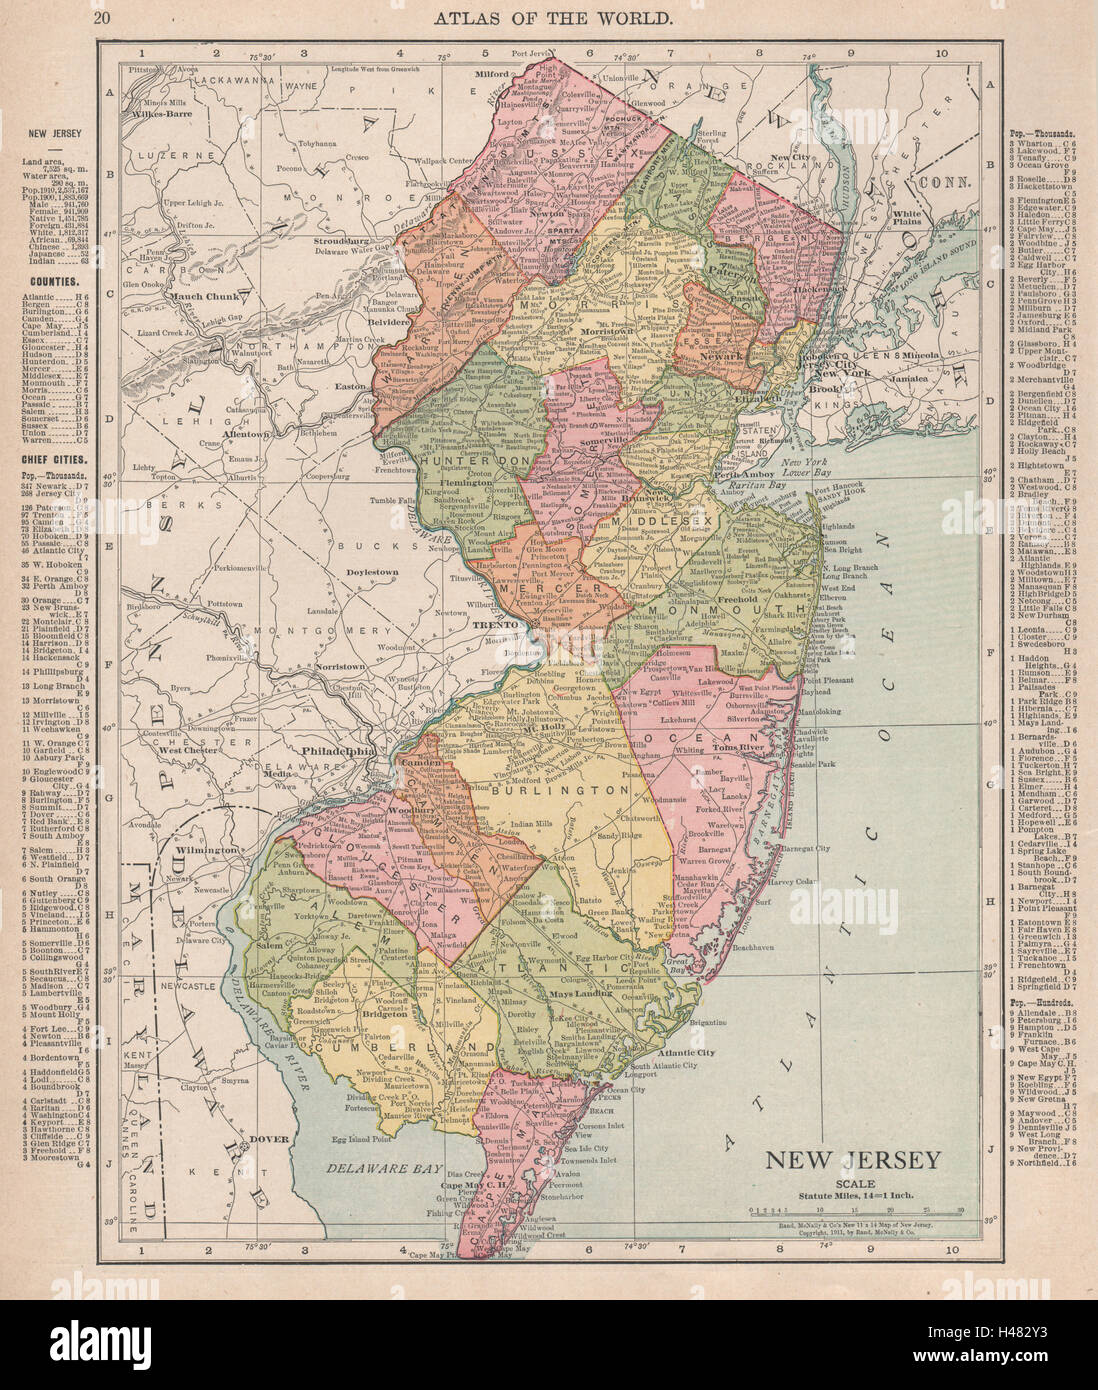 New Jersey state map showing counties. RAND MCNALLY 1912 old antique chart Stock Photo